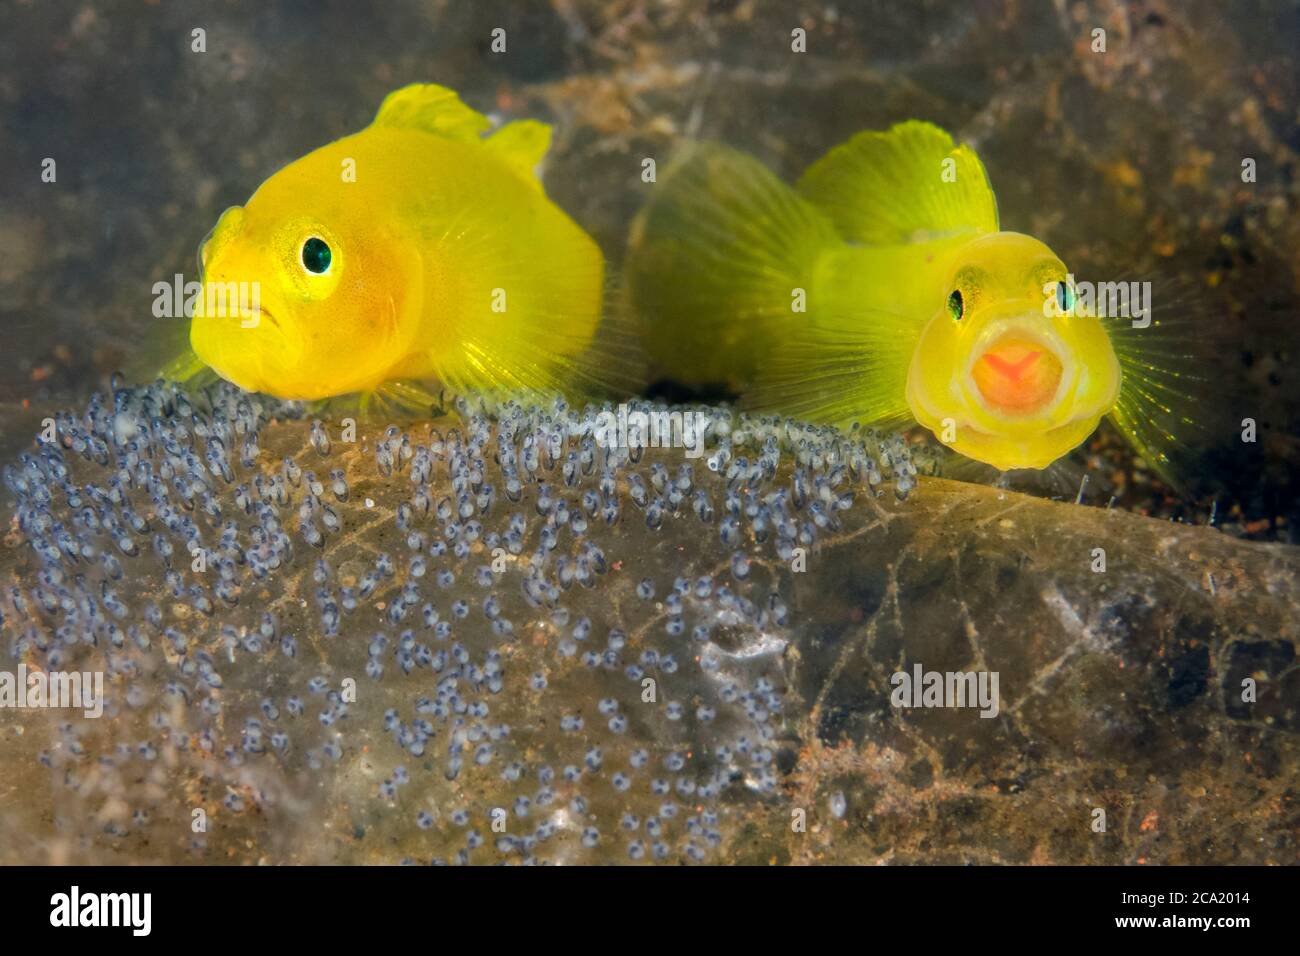 Yellow Goby, Lubricogobius exiguus, mating pair, tending and guarding its eggs, Tulamben, Bali, Indonesia, Indo-Pacific Ocean Stock Photo